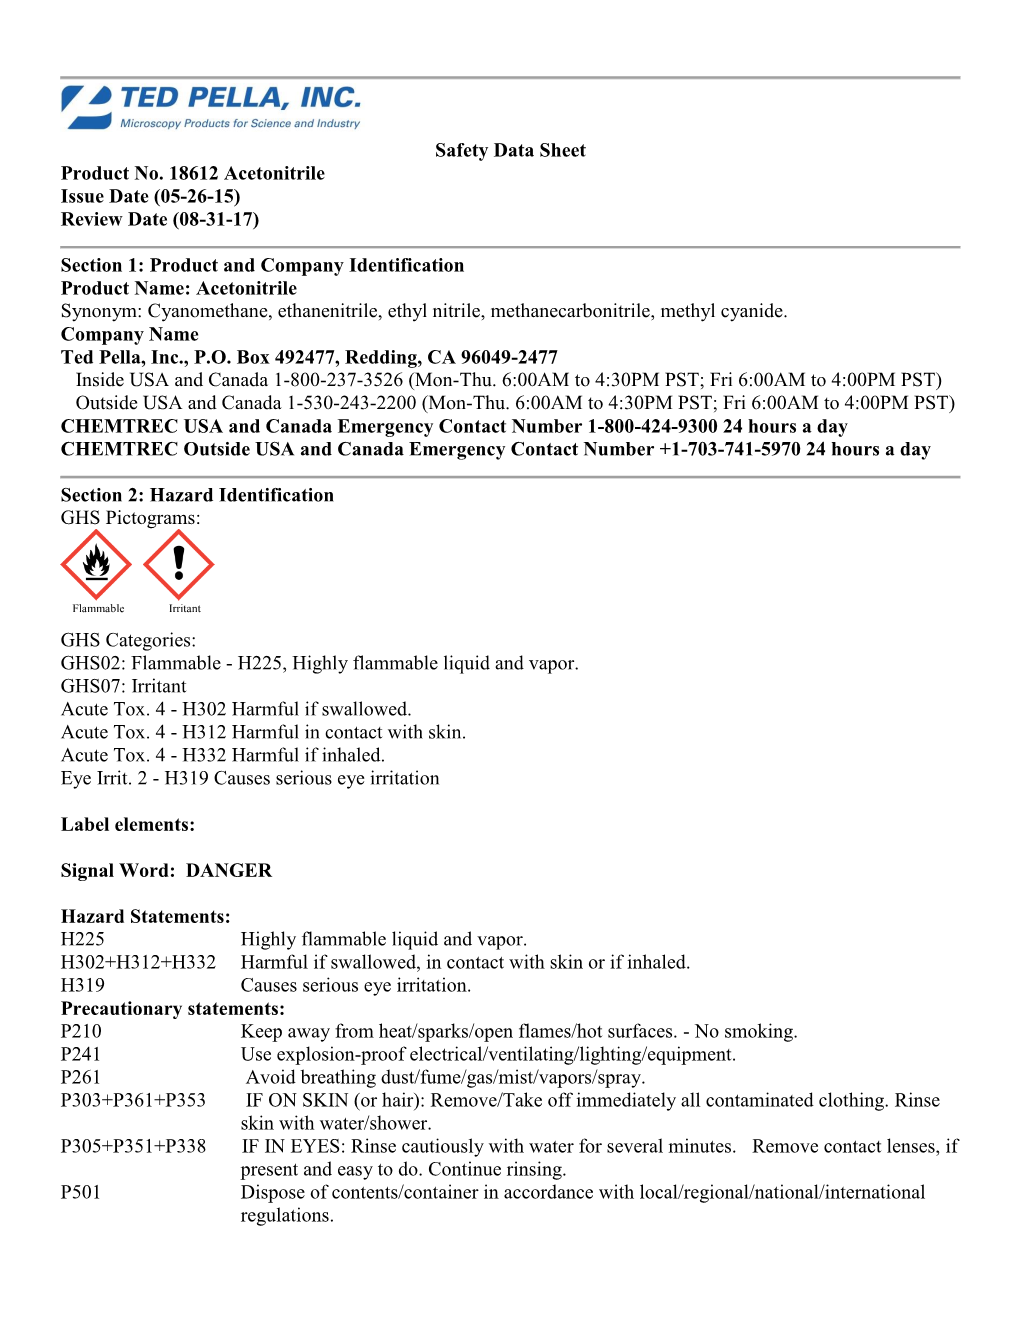 Safety Data Sheet Product No. 18612 Acetonitrile Issue Date (05-26-15) Review Date (08-31-17)